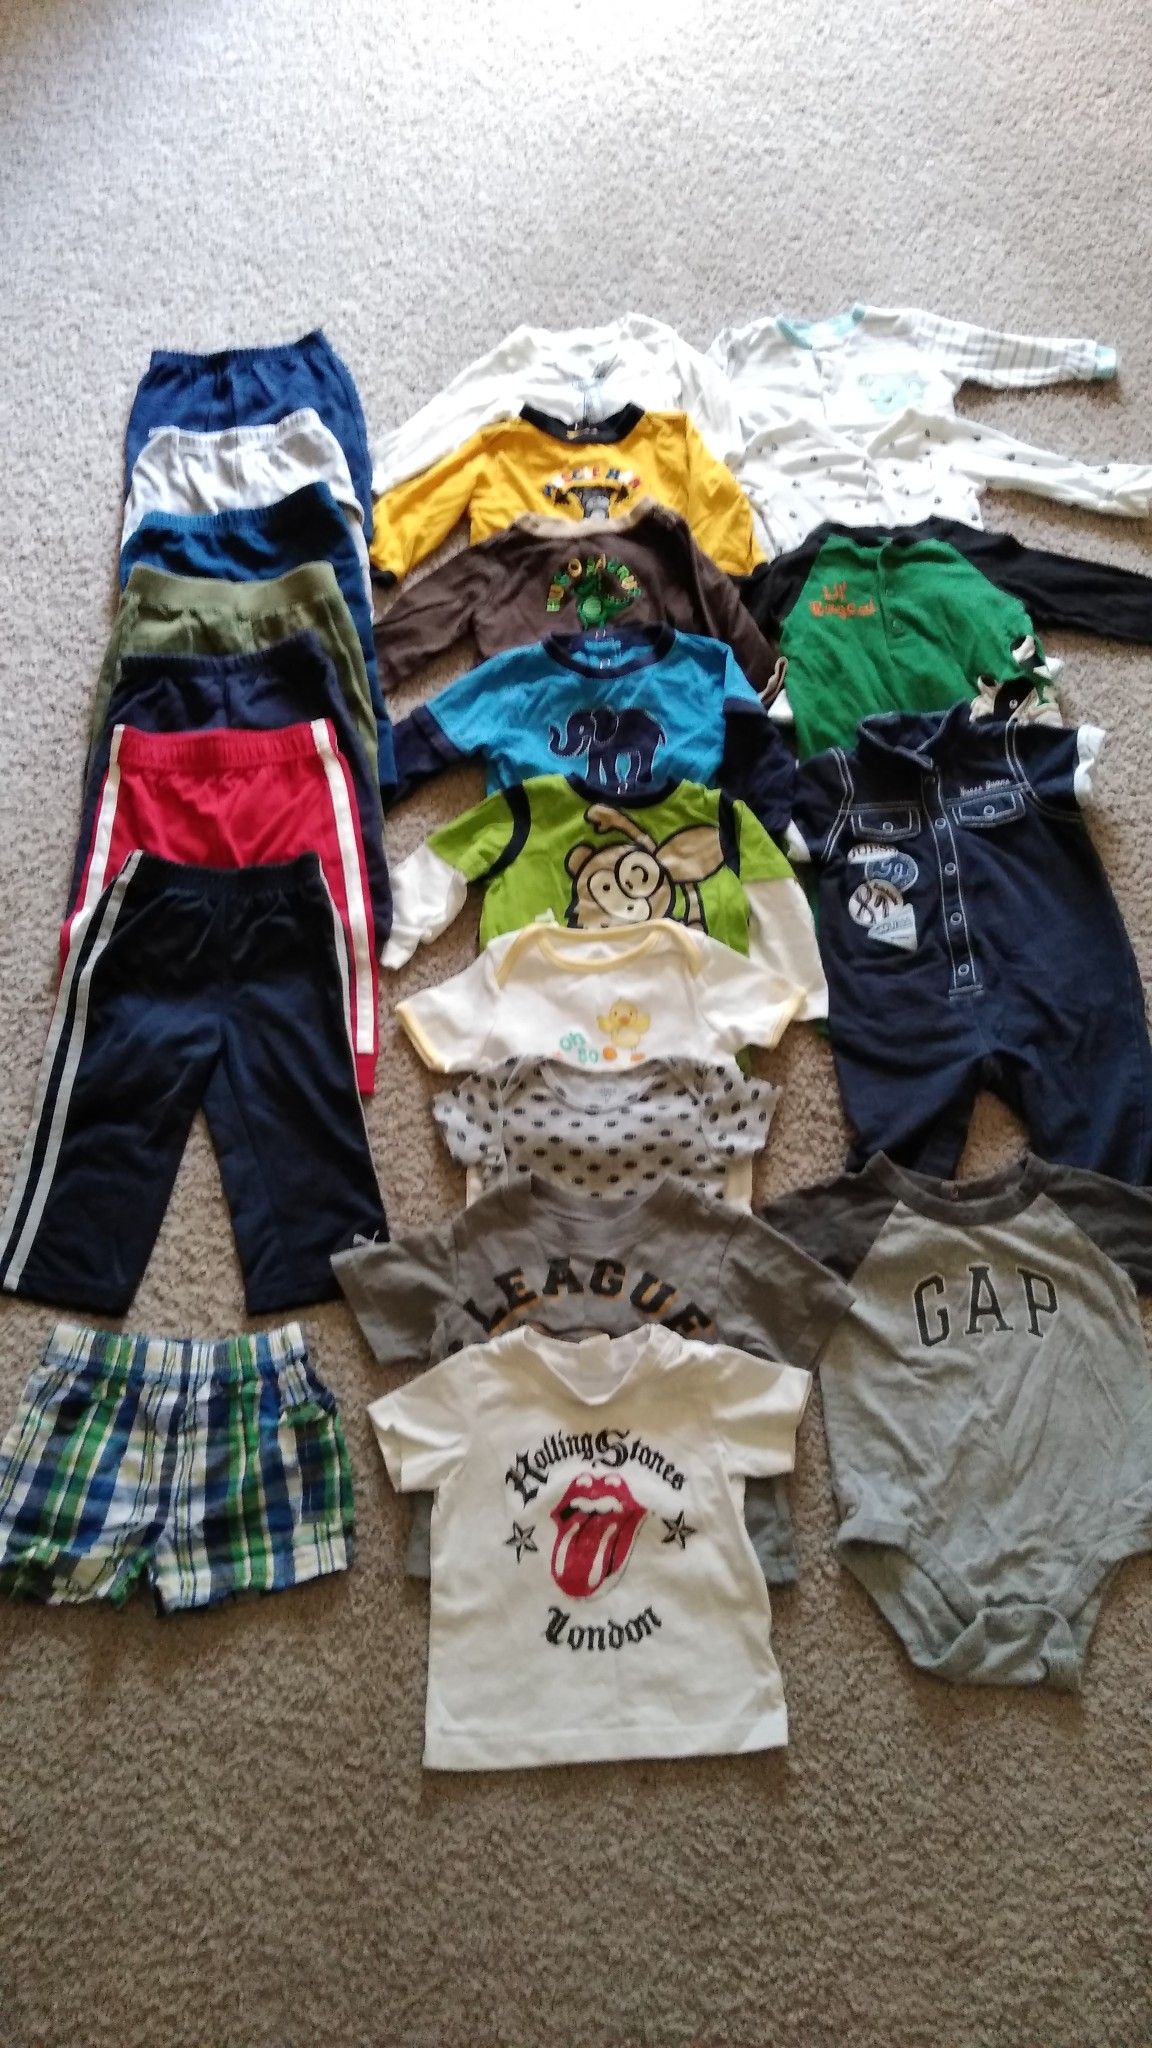 22 Beautiful Baby Boy's Clothes ( excellent condition ) price for all ..